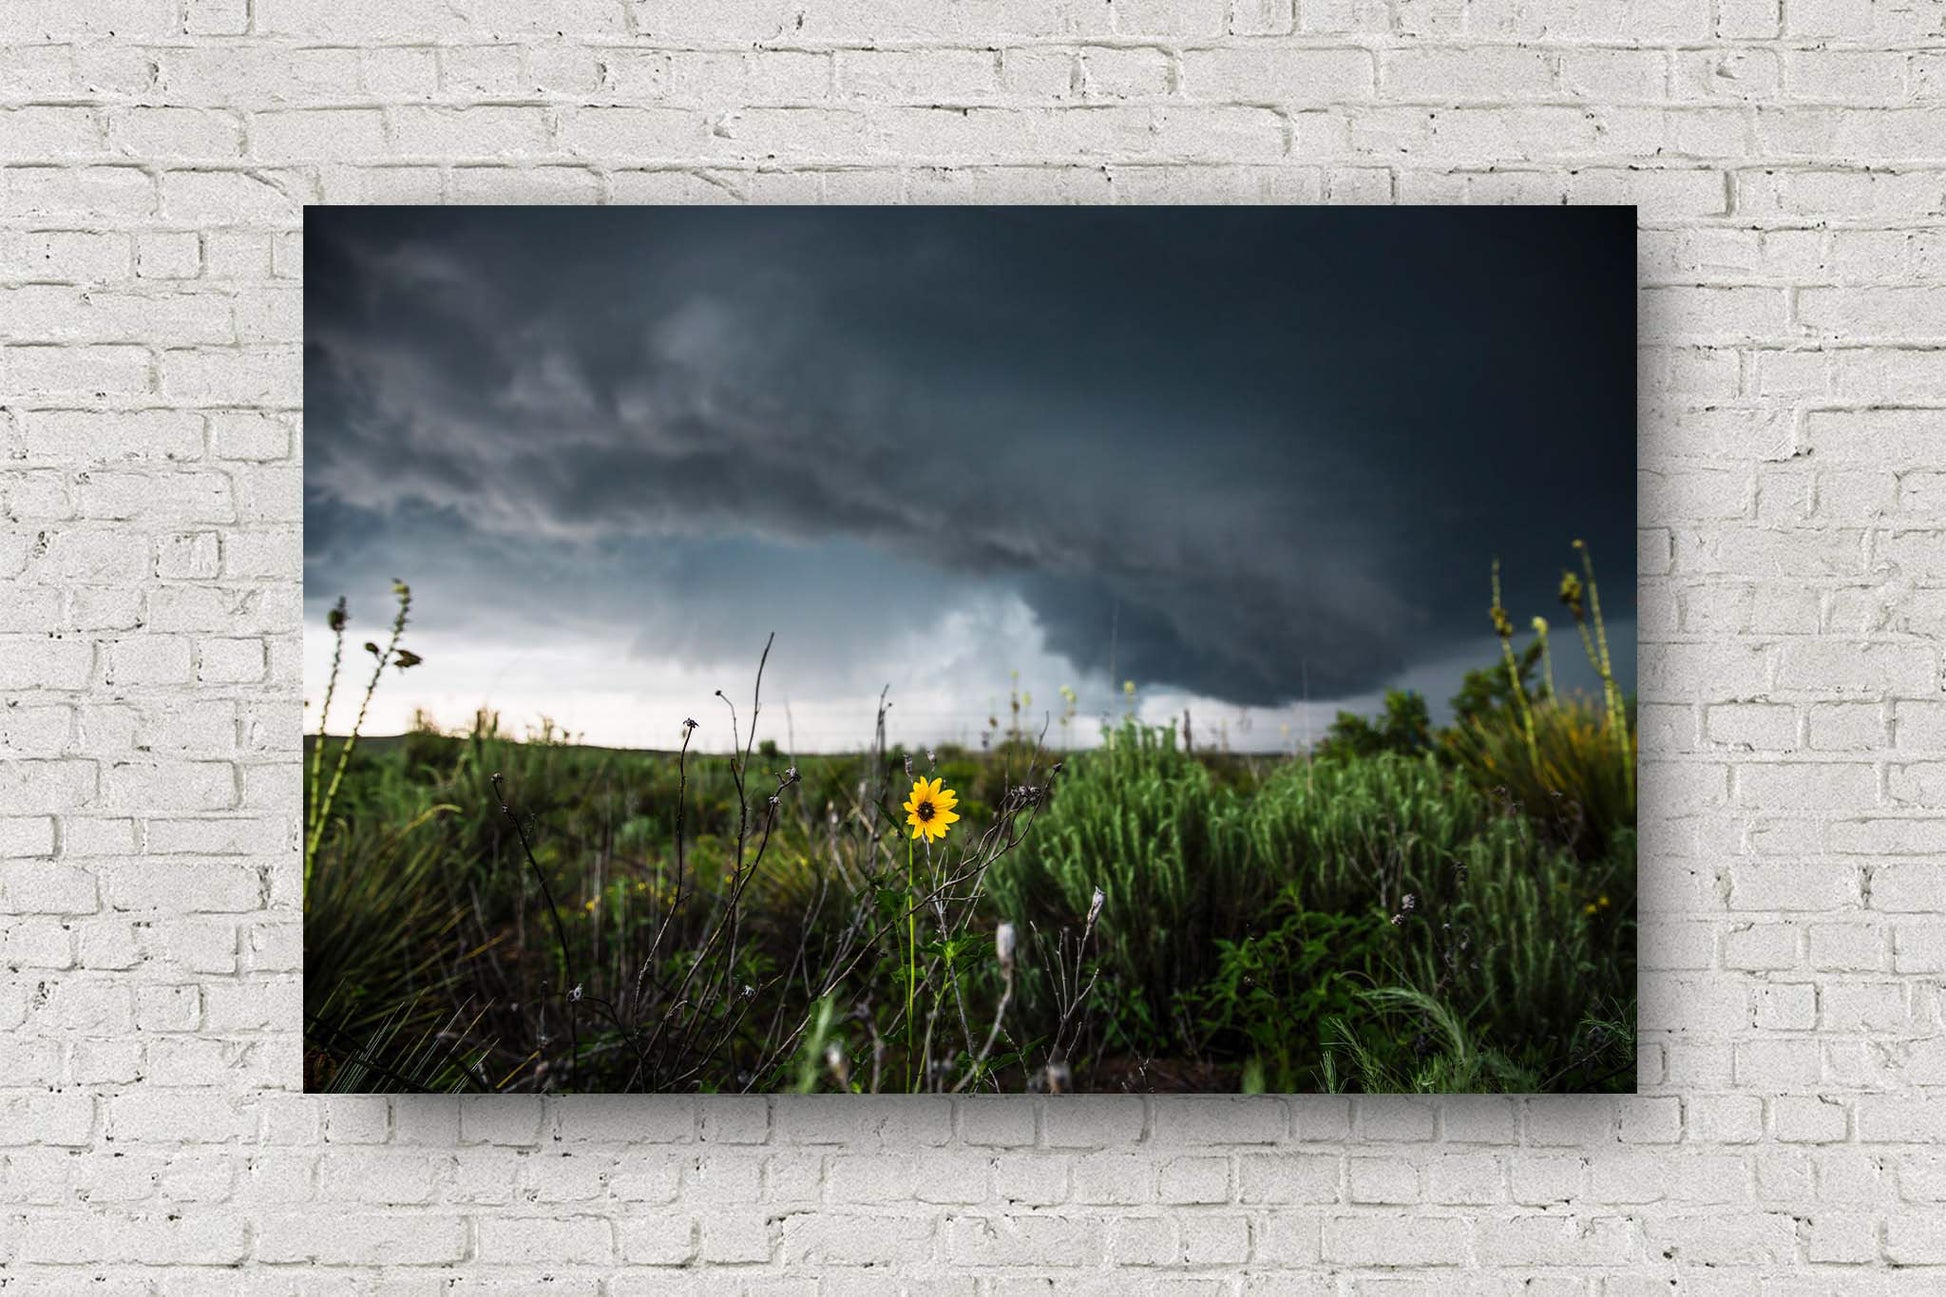 Storm metal print of a wild sunflower standing tall as an intense thunderstorm passes behind on a spring day in Texas by Sean Ramsey of Southern Plains Photography.